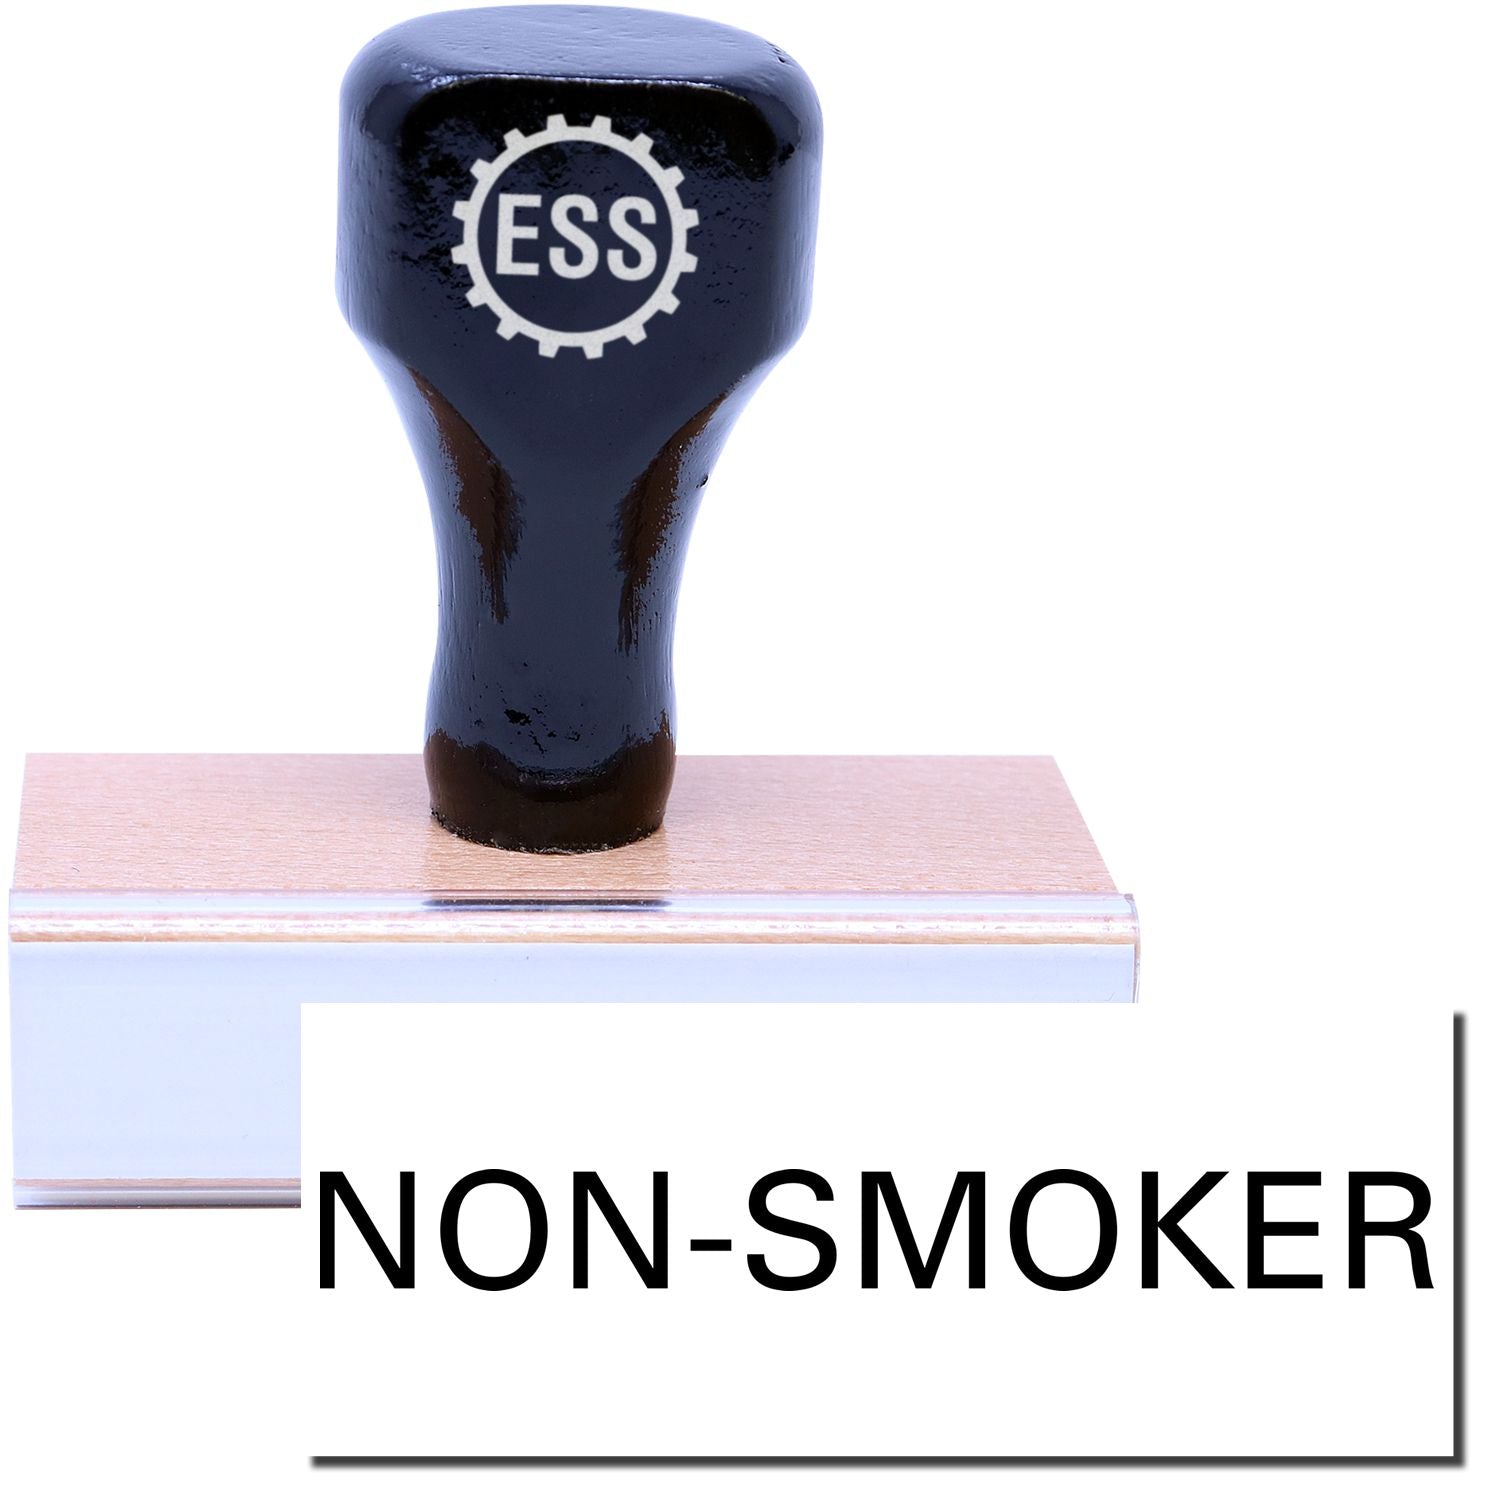 A stock office rubber stamp with a stamped image showing how the text "NON-SMOKER" is displayed after stamping.